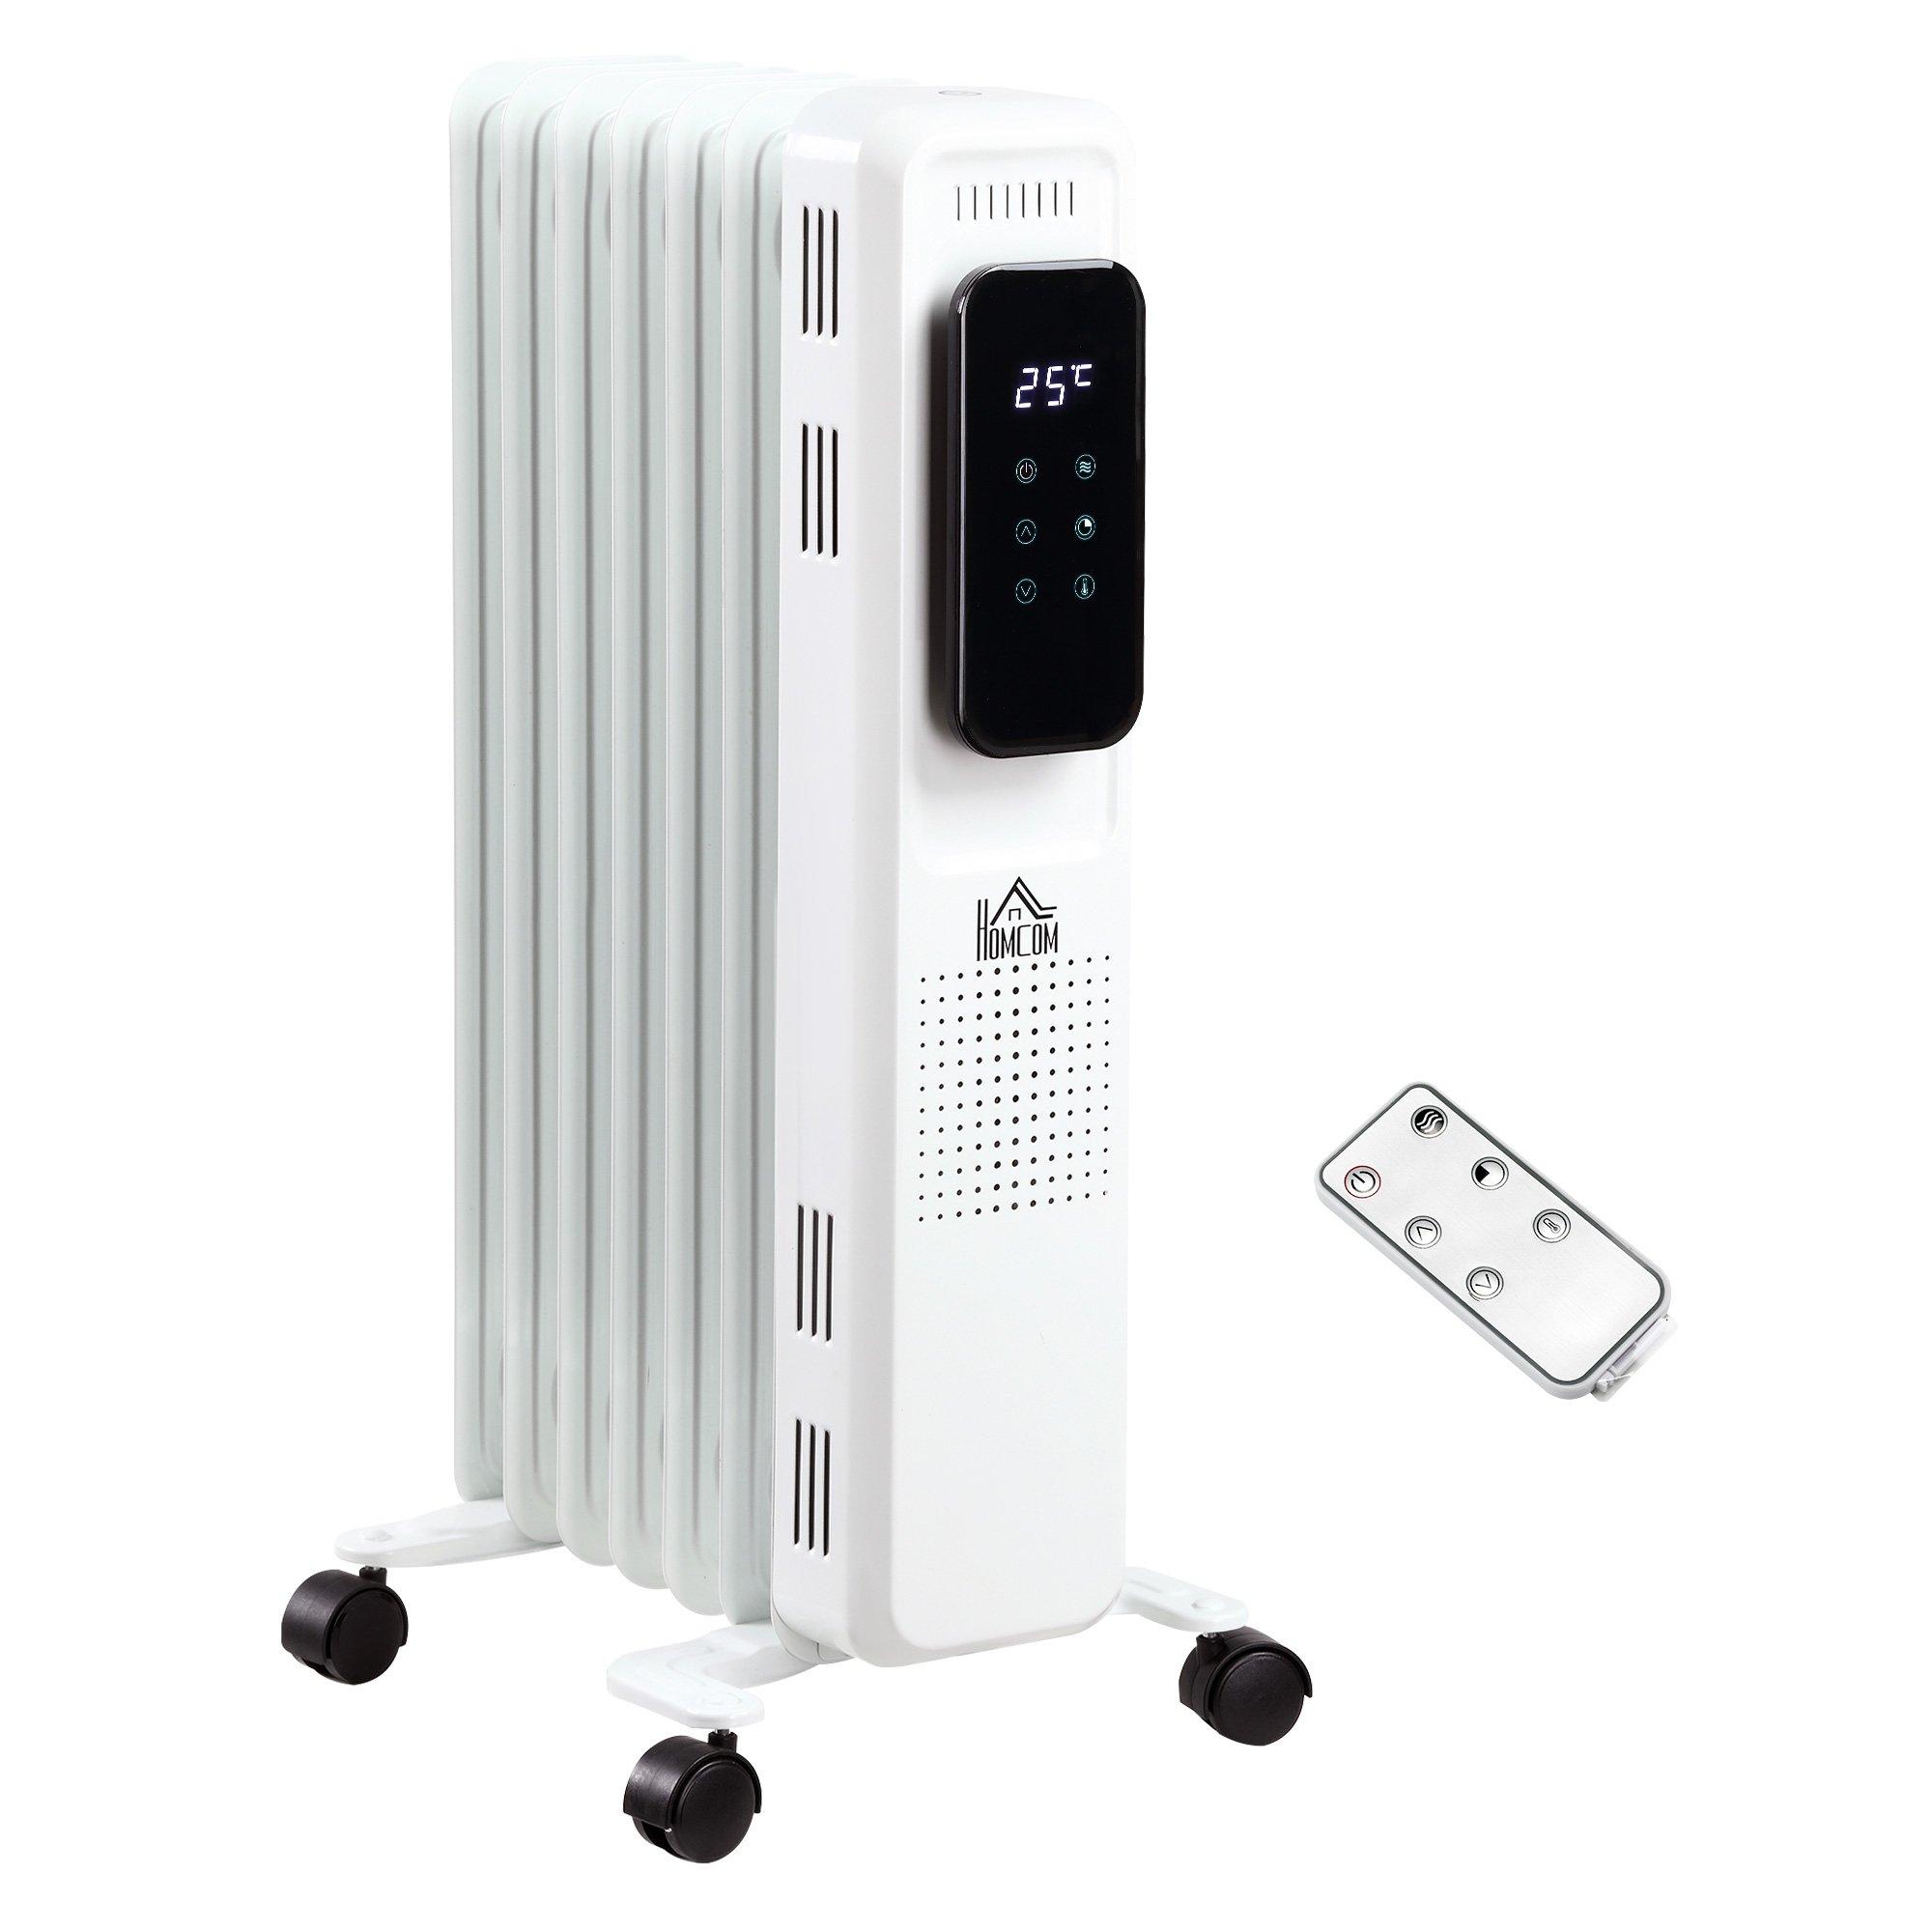 Oil Filled Radiator 7 Fin Portable Heater with Timer Remote Control